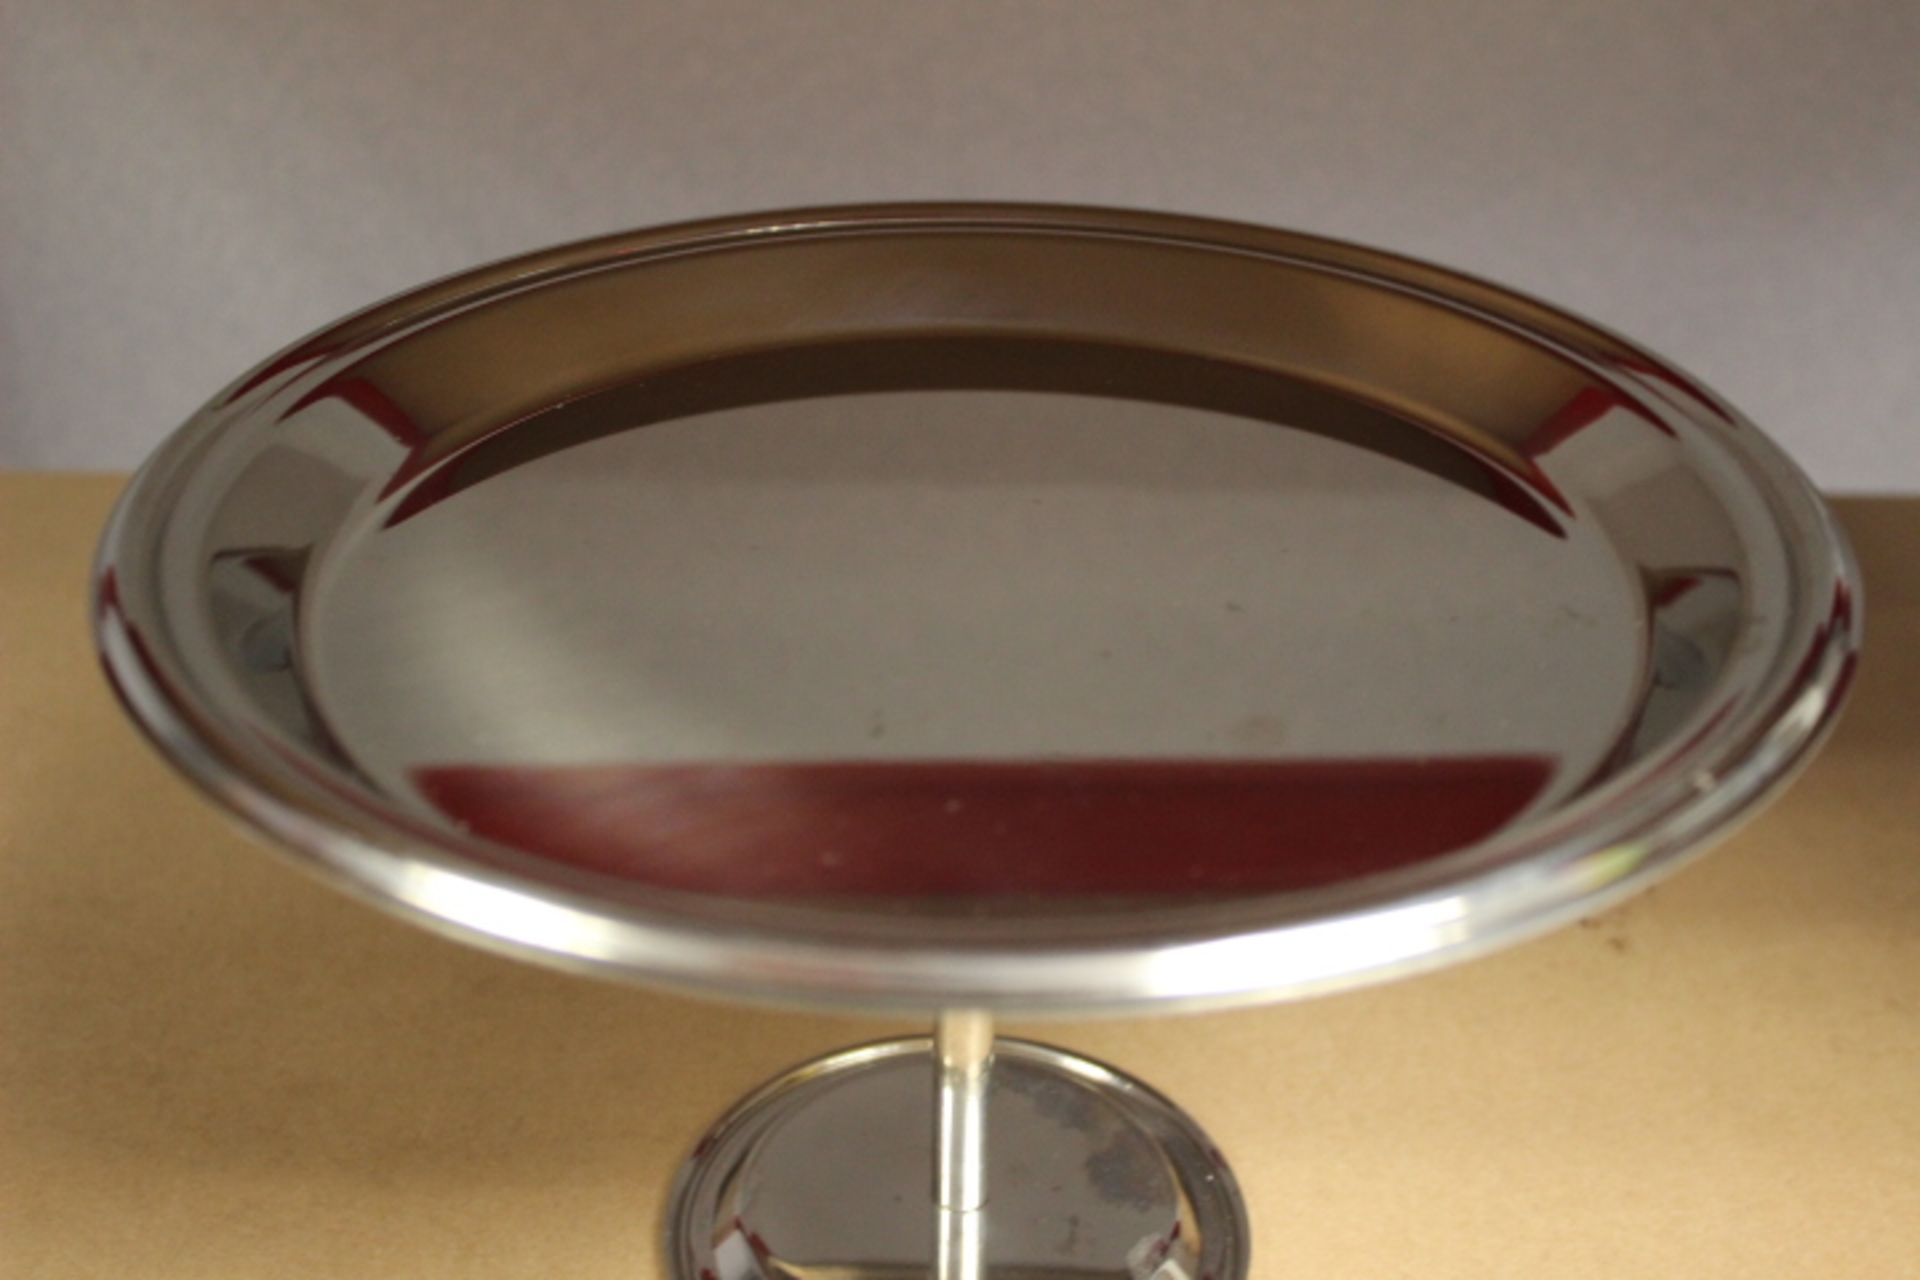 Mepra 24 cm Petit-Fours Stand with Base, Silver - Image 3 of 3